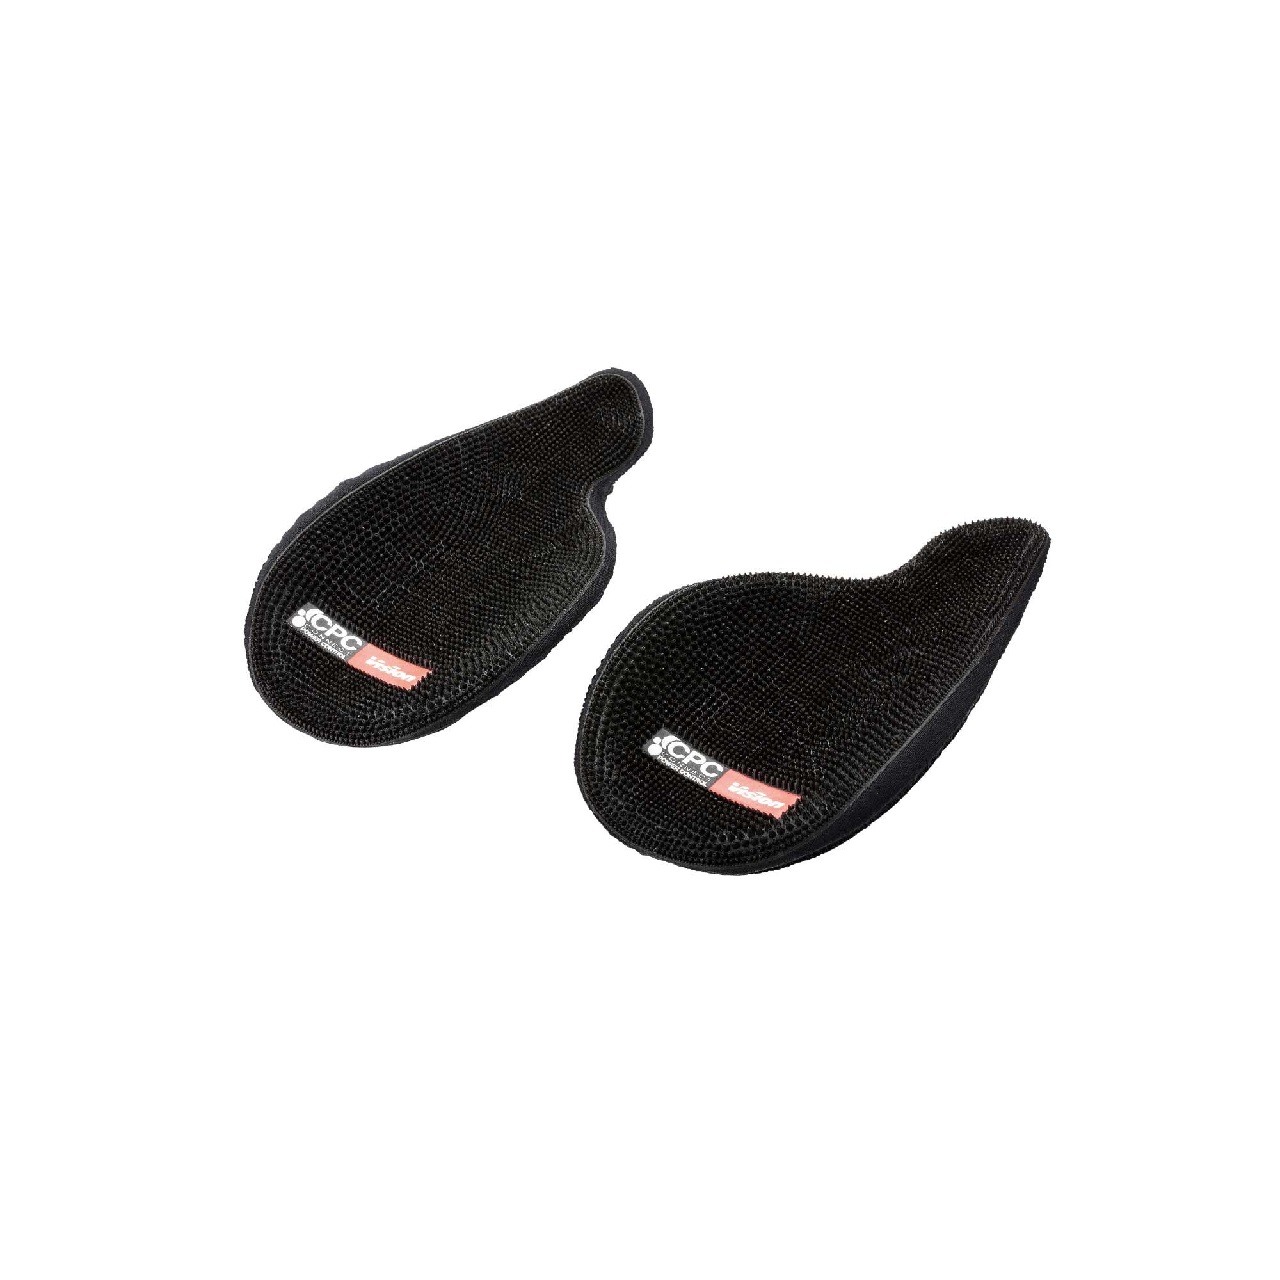 Vision CPC (Connect Power Control) Repacement aero bar pads for TFE bars